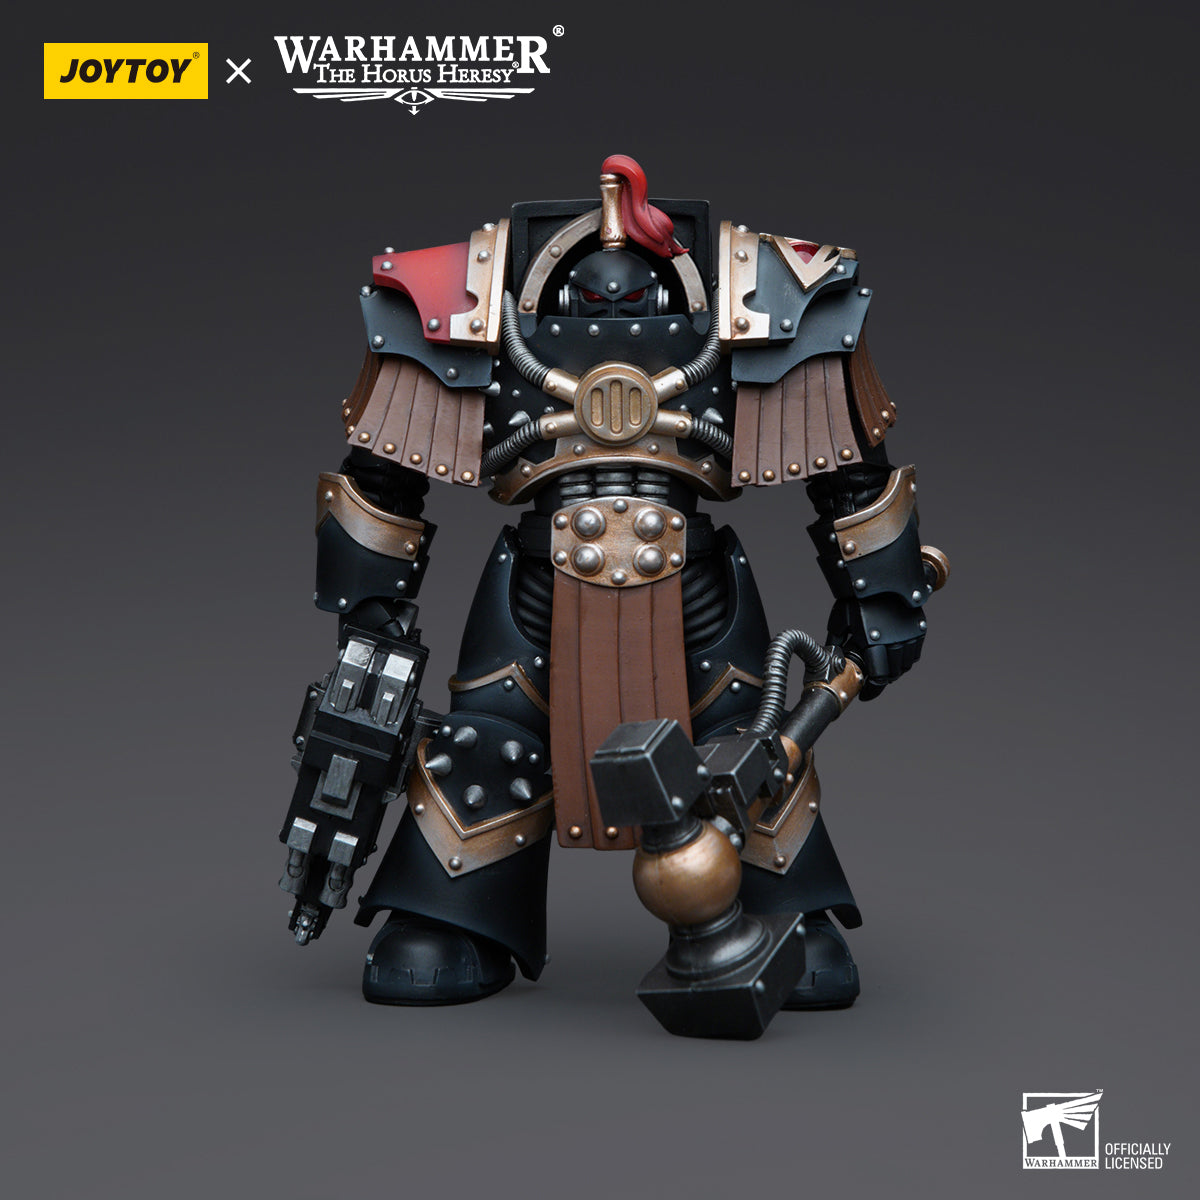 Warhammer Collectibles: 1/18 Scale Sons of Horus Justaerin Terminator Squad Justaerin Thundr Hammer (Preorder)